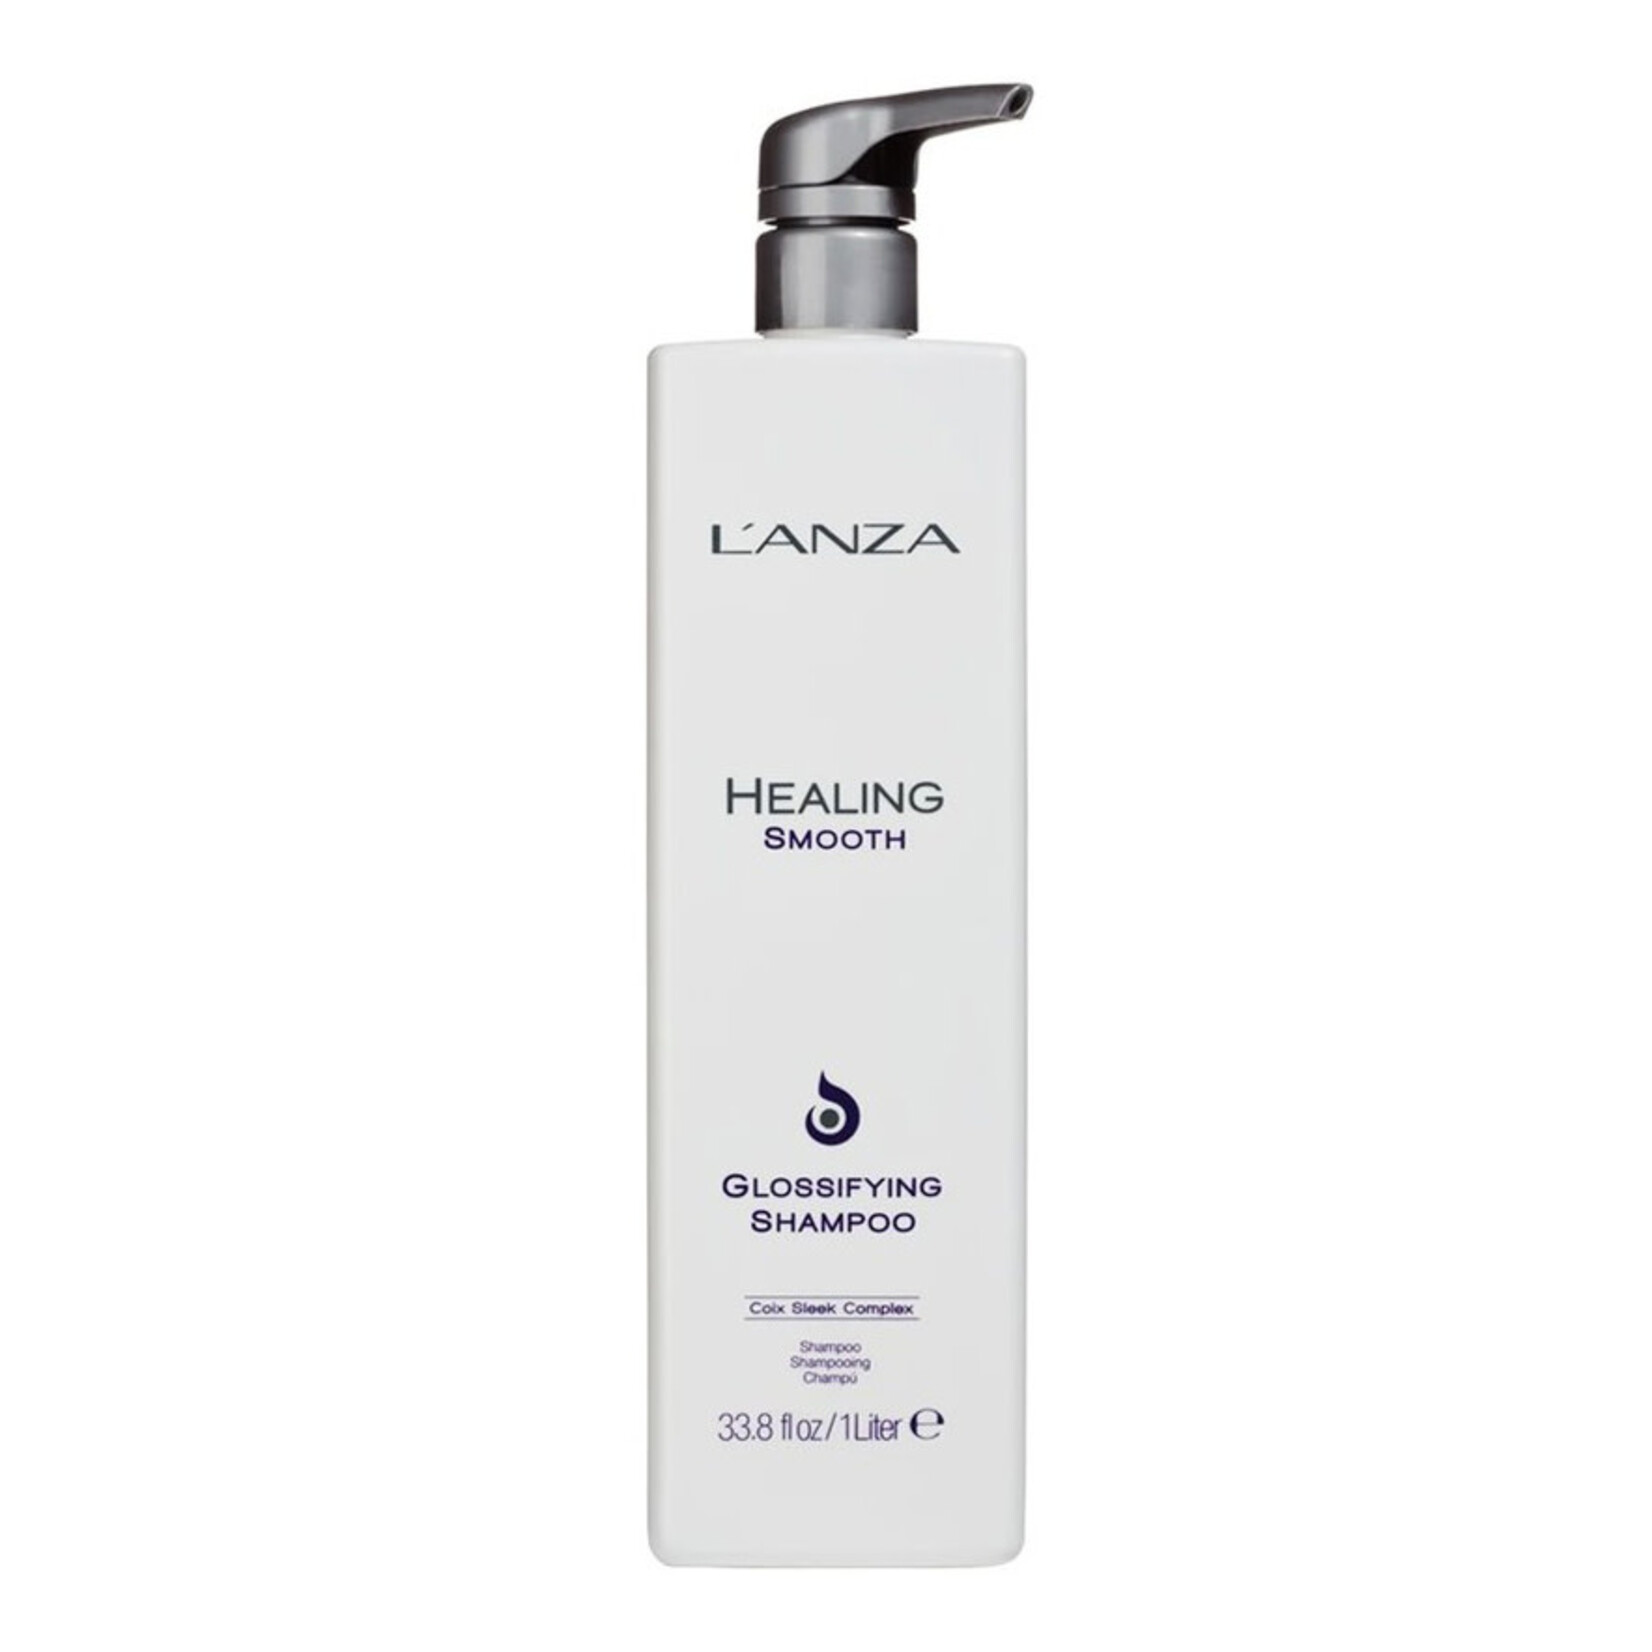 L'Anza L'anza - Healing smooth - Glossifying shampooing 1L